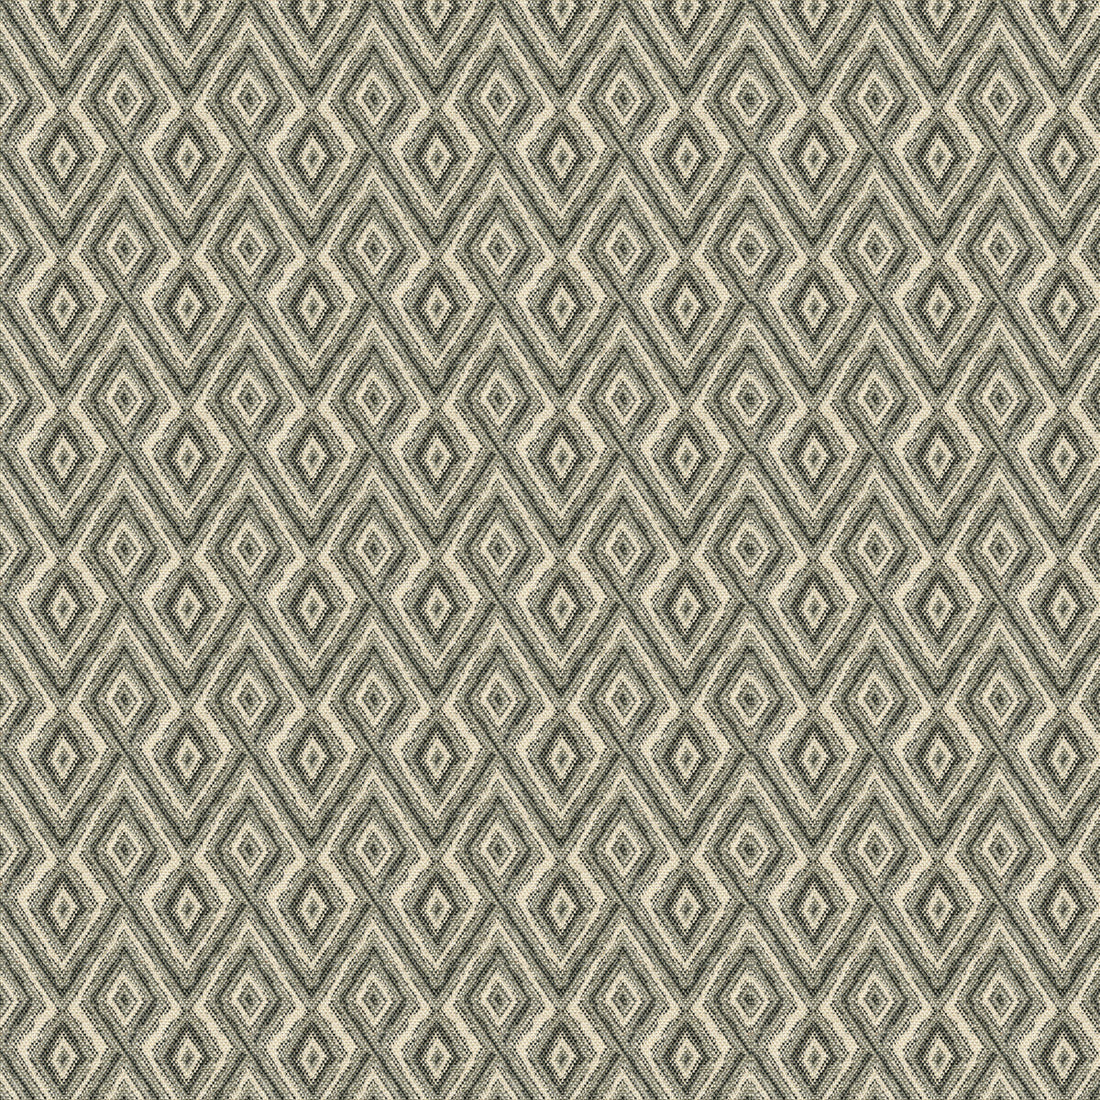 Banati fabric in quartz color - pattern 33863.1611.0 - by Kravet Contract in the Tanzania J Banks collection